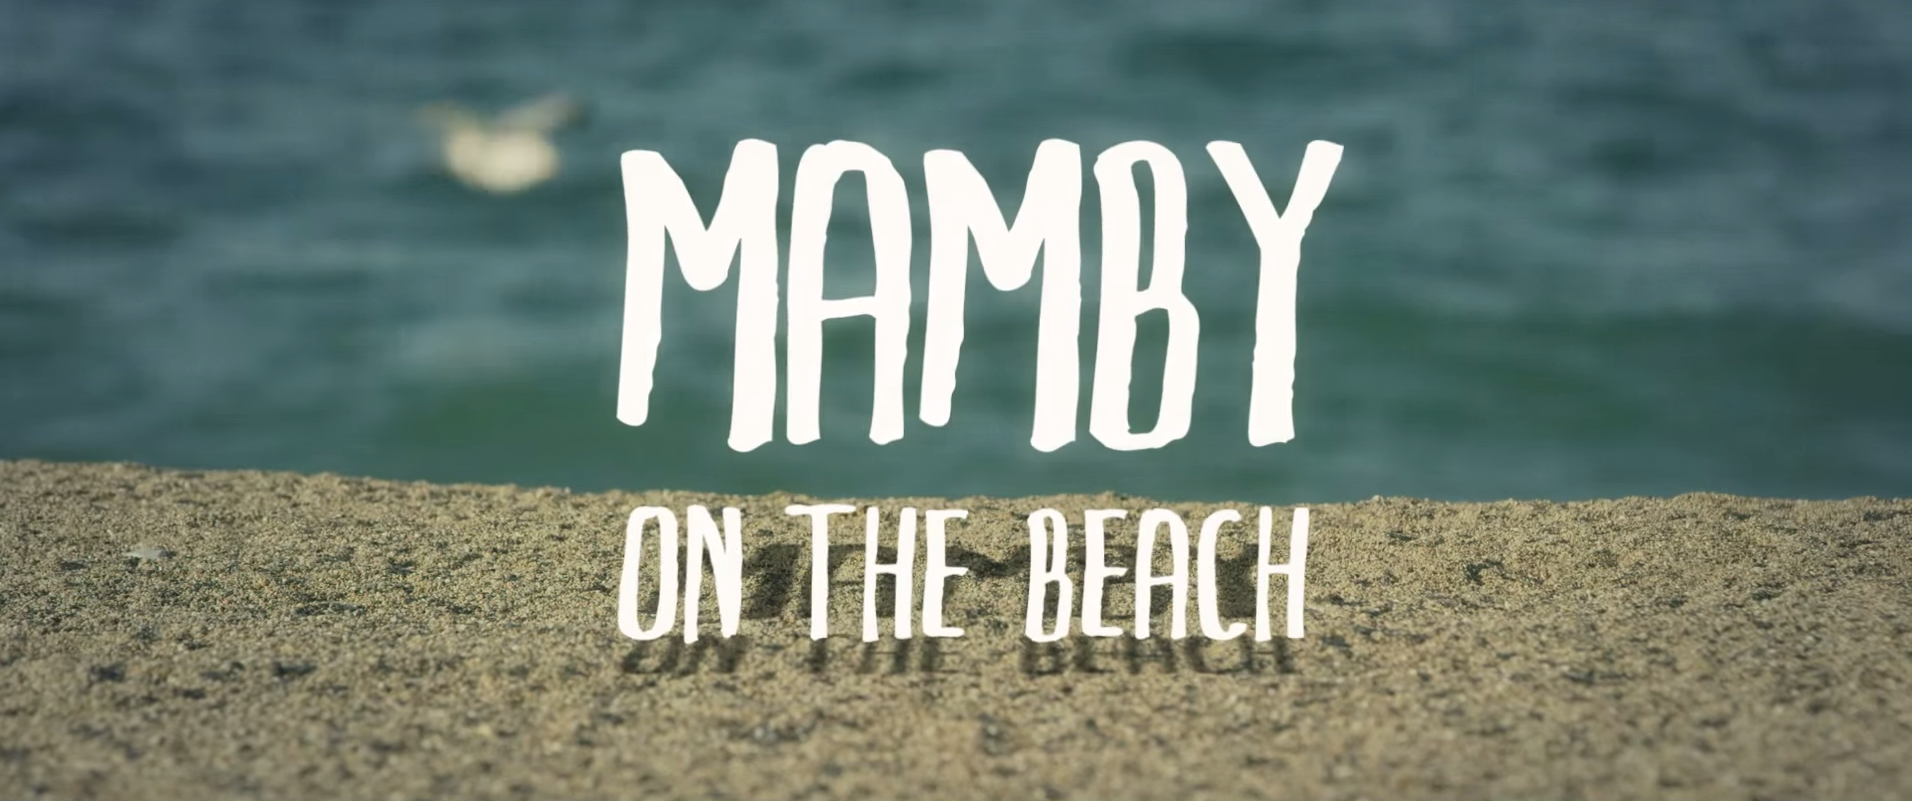 Mamby on the Beach. Image by: Mamby on the Beach / YouTube